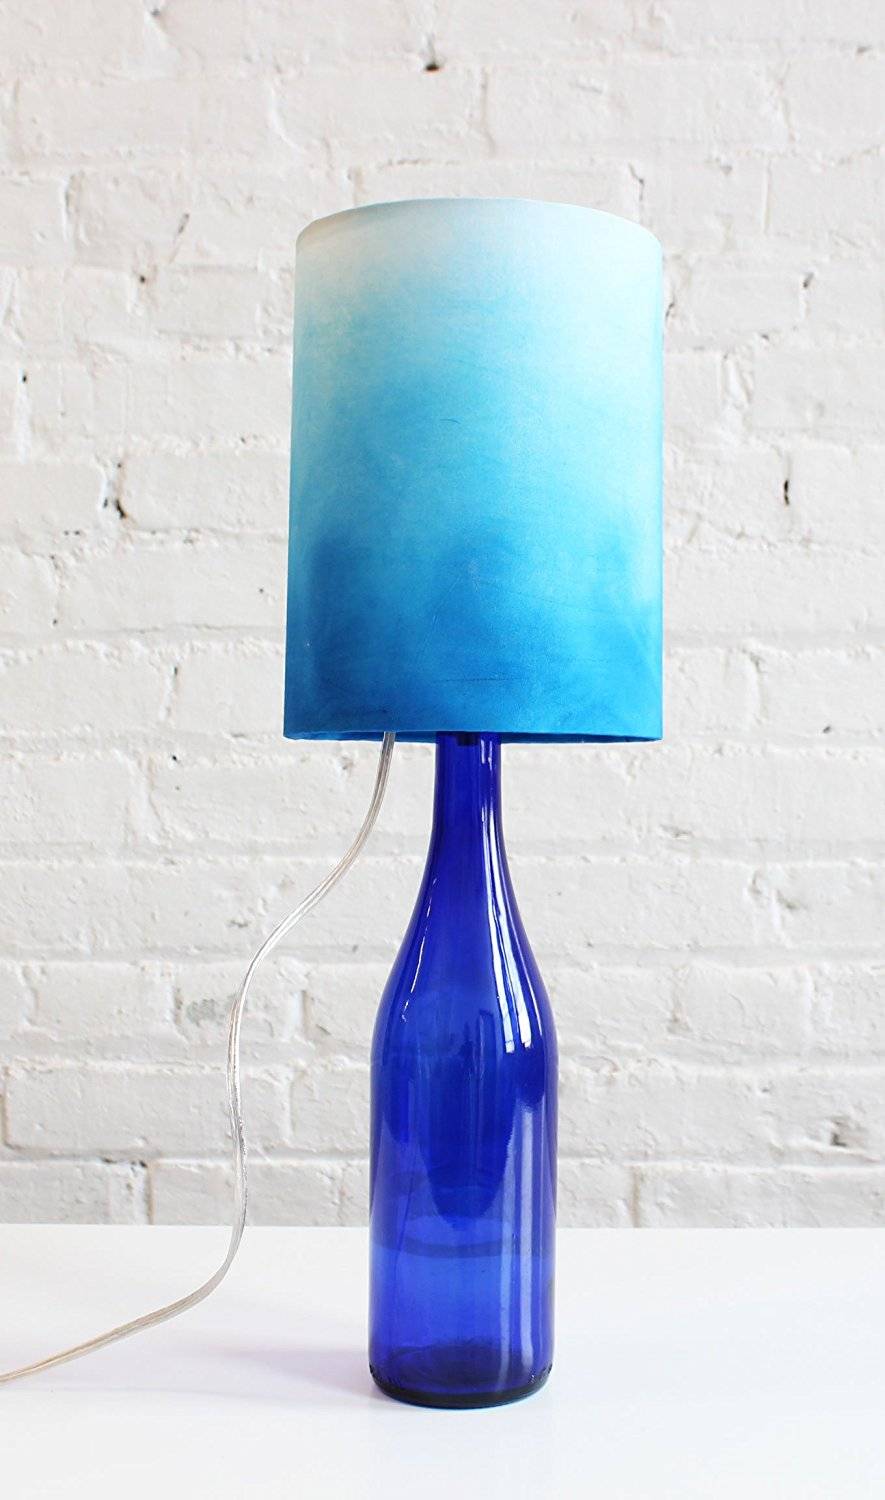 A Spotlight on Adhesive Styrene + How to Make a Lampshade You Love - Makely